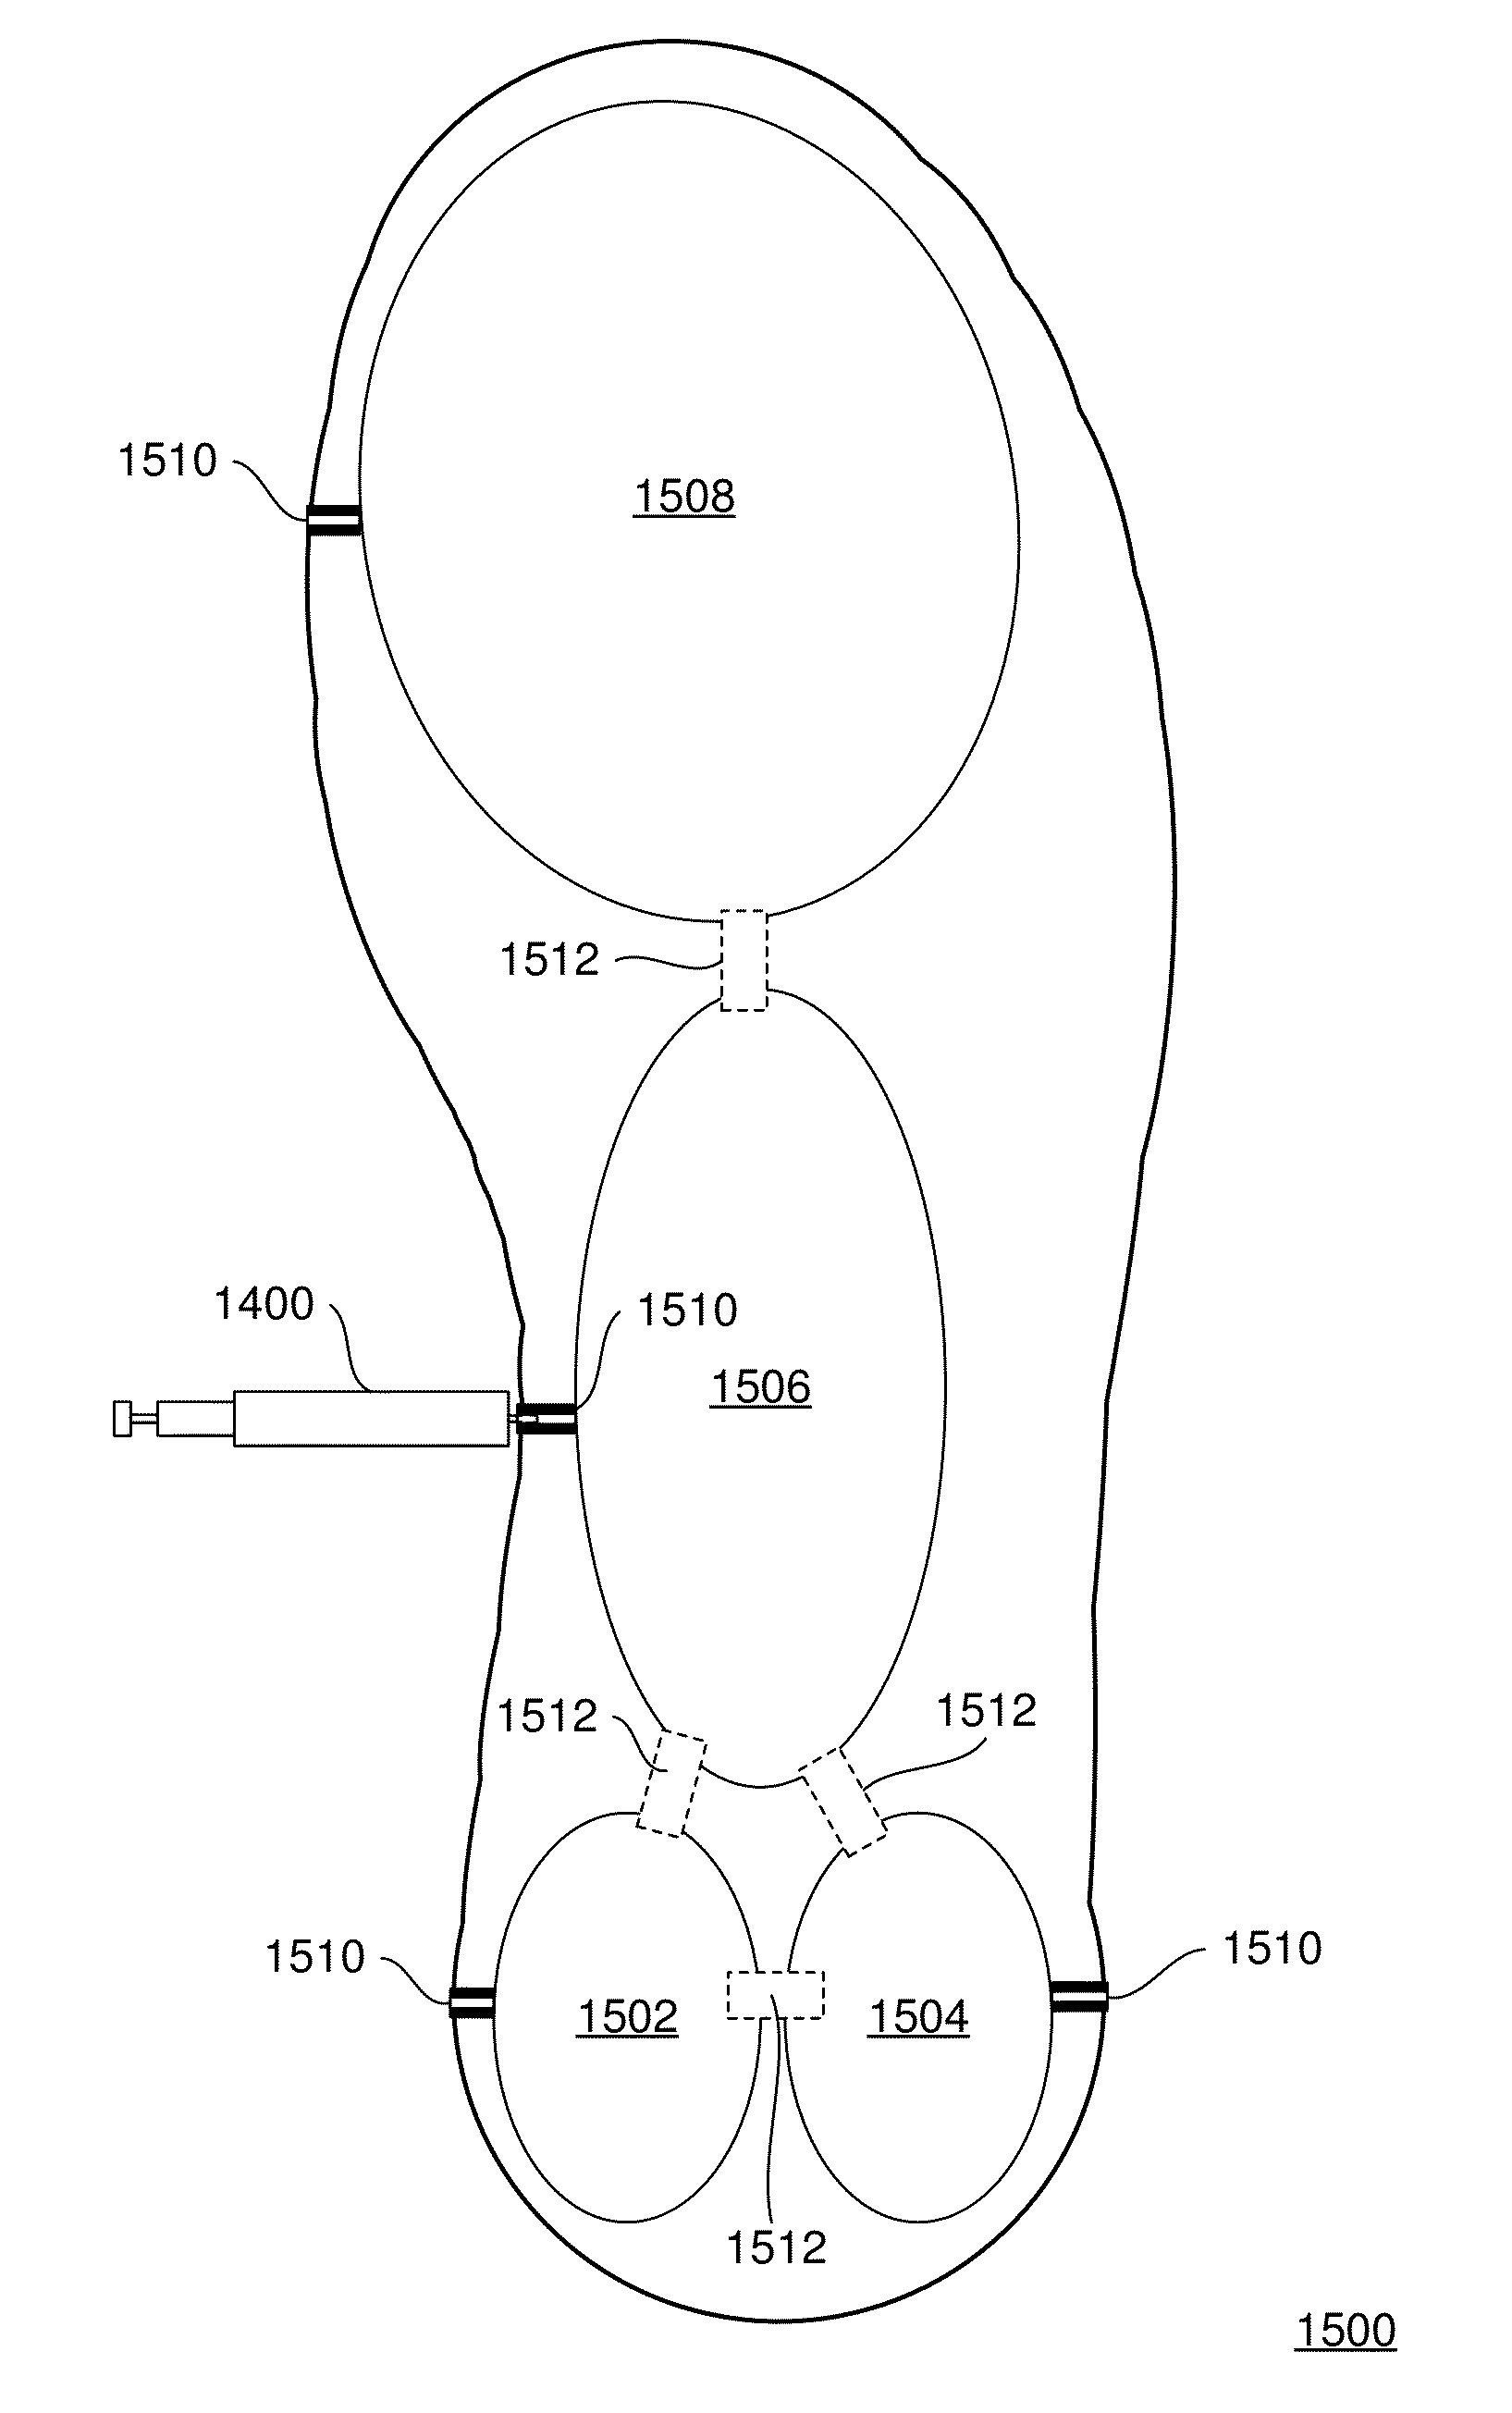 Pneumatically inflatable air bladder devices contained entirely within shoe sole or configured as shoe inserts